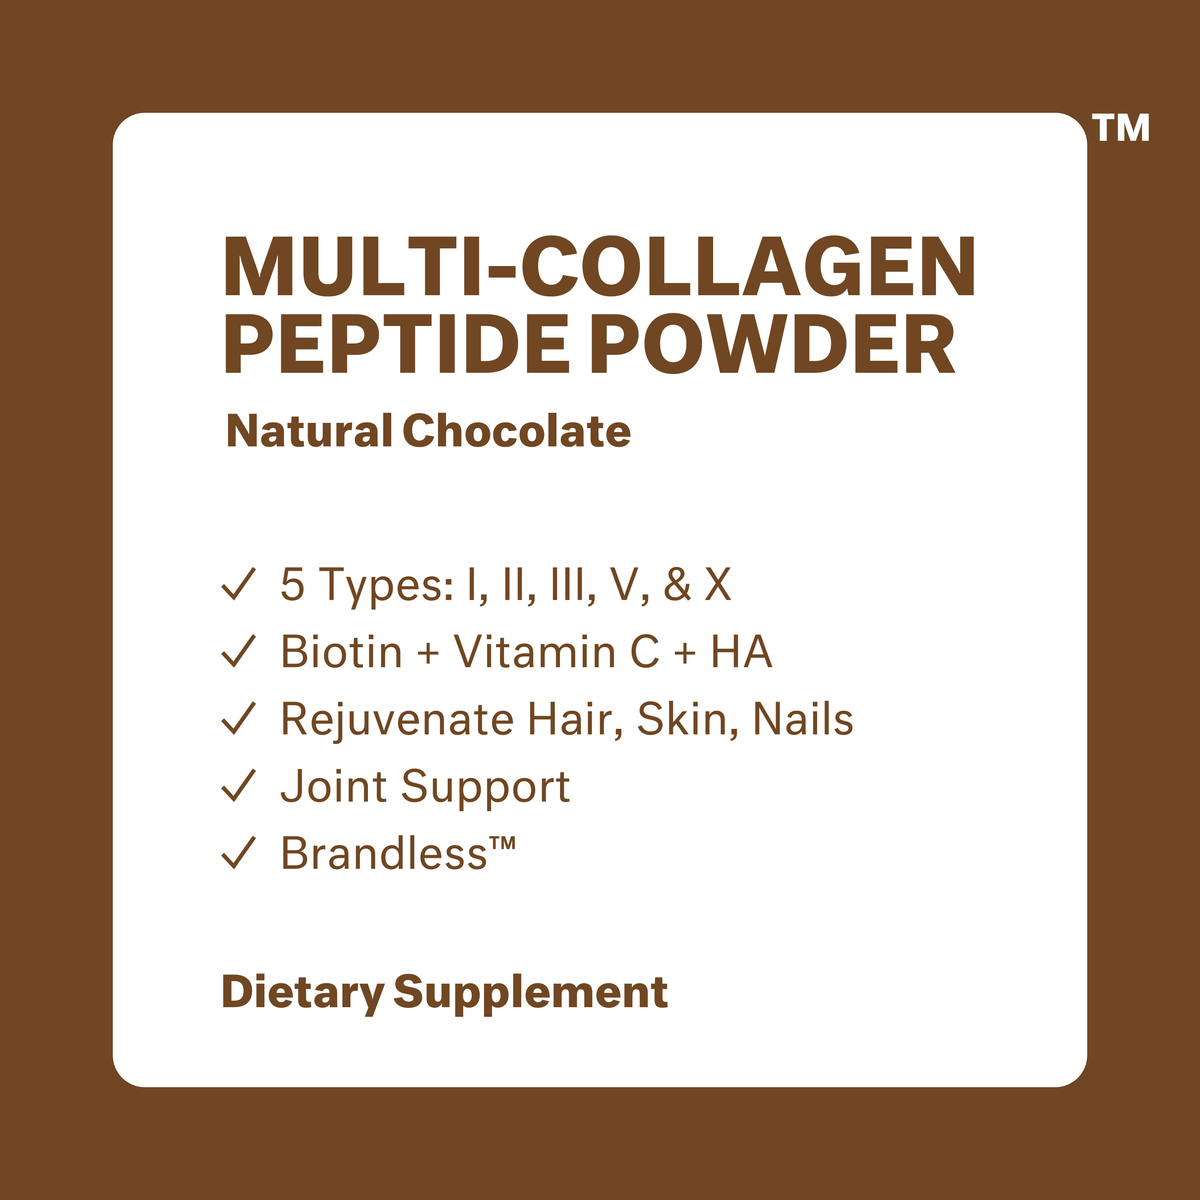 Multi-collagen peptide powder, natural chocolate. 5 types of collagen peptides: I, II, III, V, and X. Biotin + Vitamin C + HA. Rejuvinate Hair, Skin, and Nails. Joint Support. brandless. Dietary supplement.